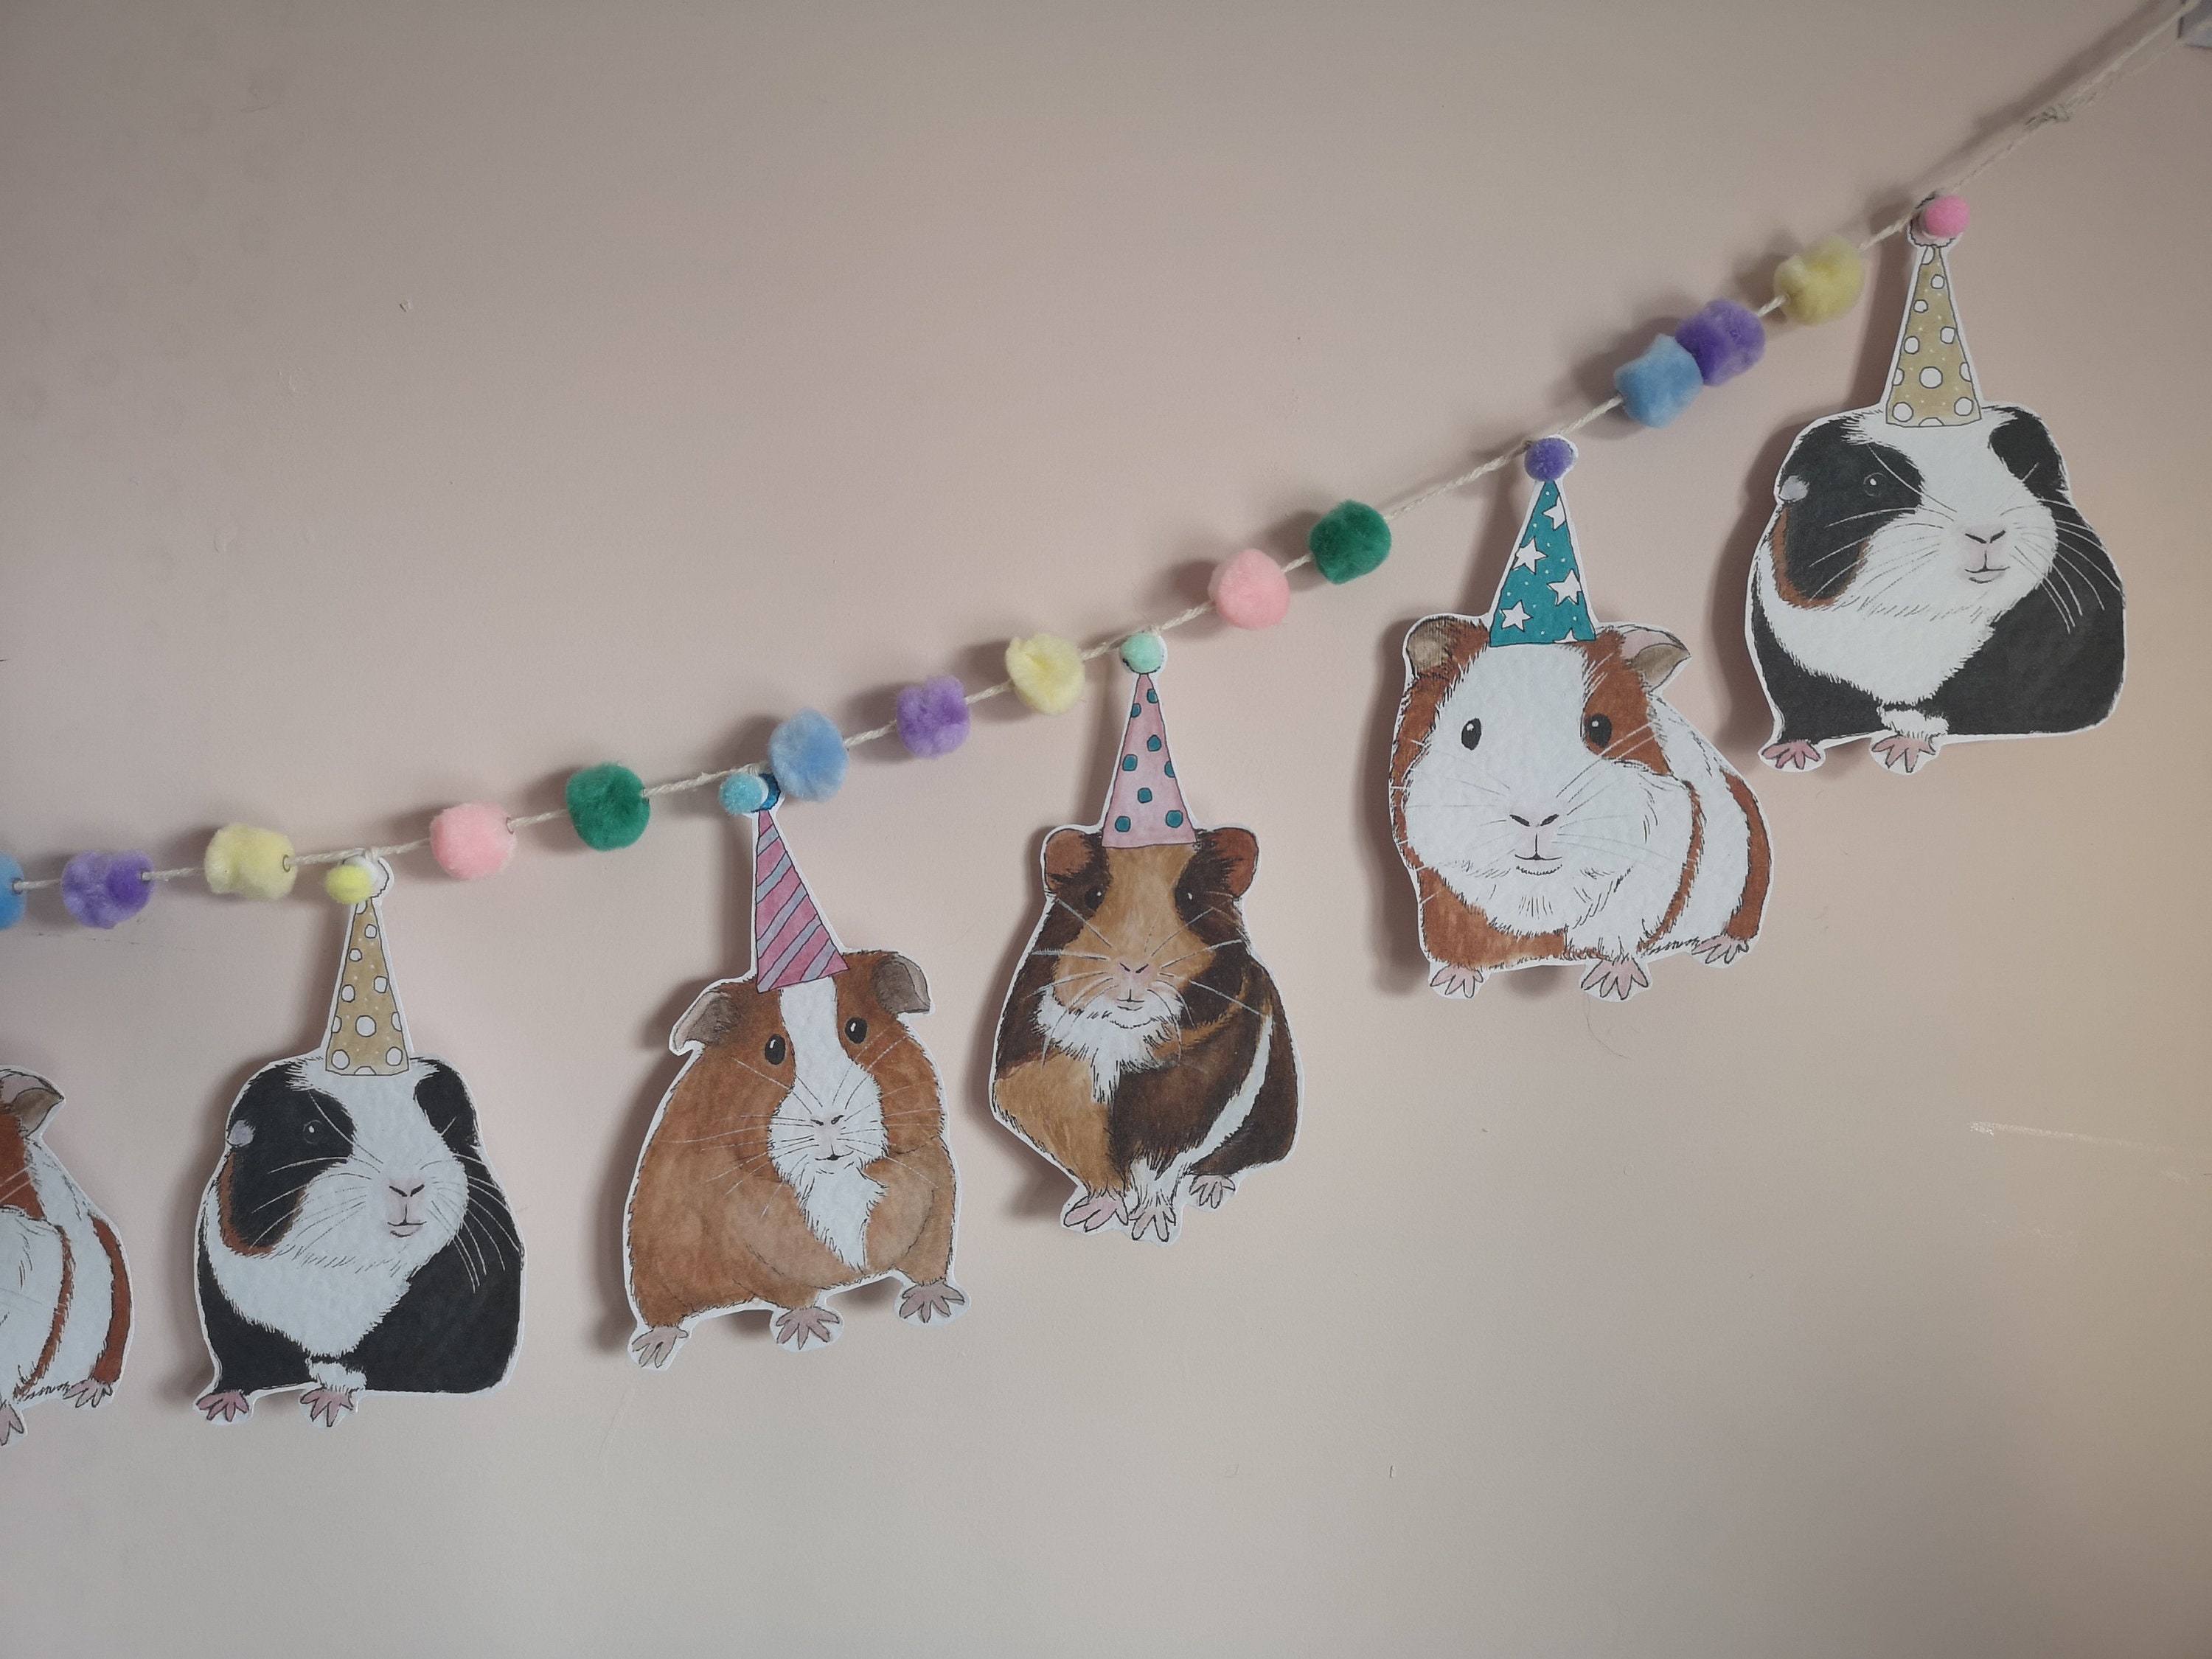  Guinea Pig Birthday Party Decorations Hamster Party Supplies  for Kids Include Happy Birthday Banner Kawaii Pui Pui Cartoon Decorations  ，Children Birthday Party Balloons Banners Cupcake Decorations : Toys & Games